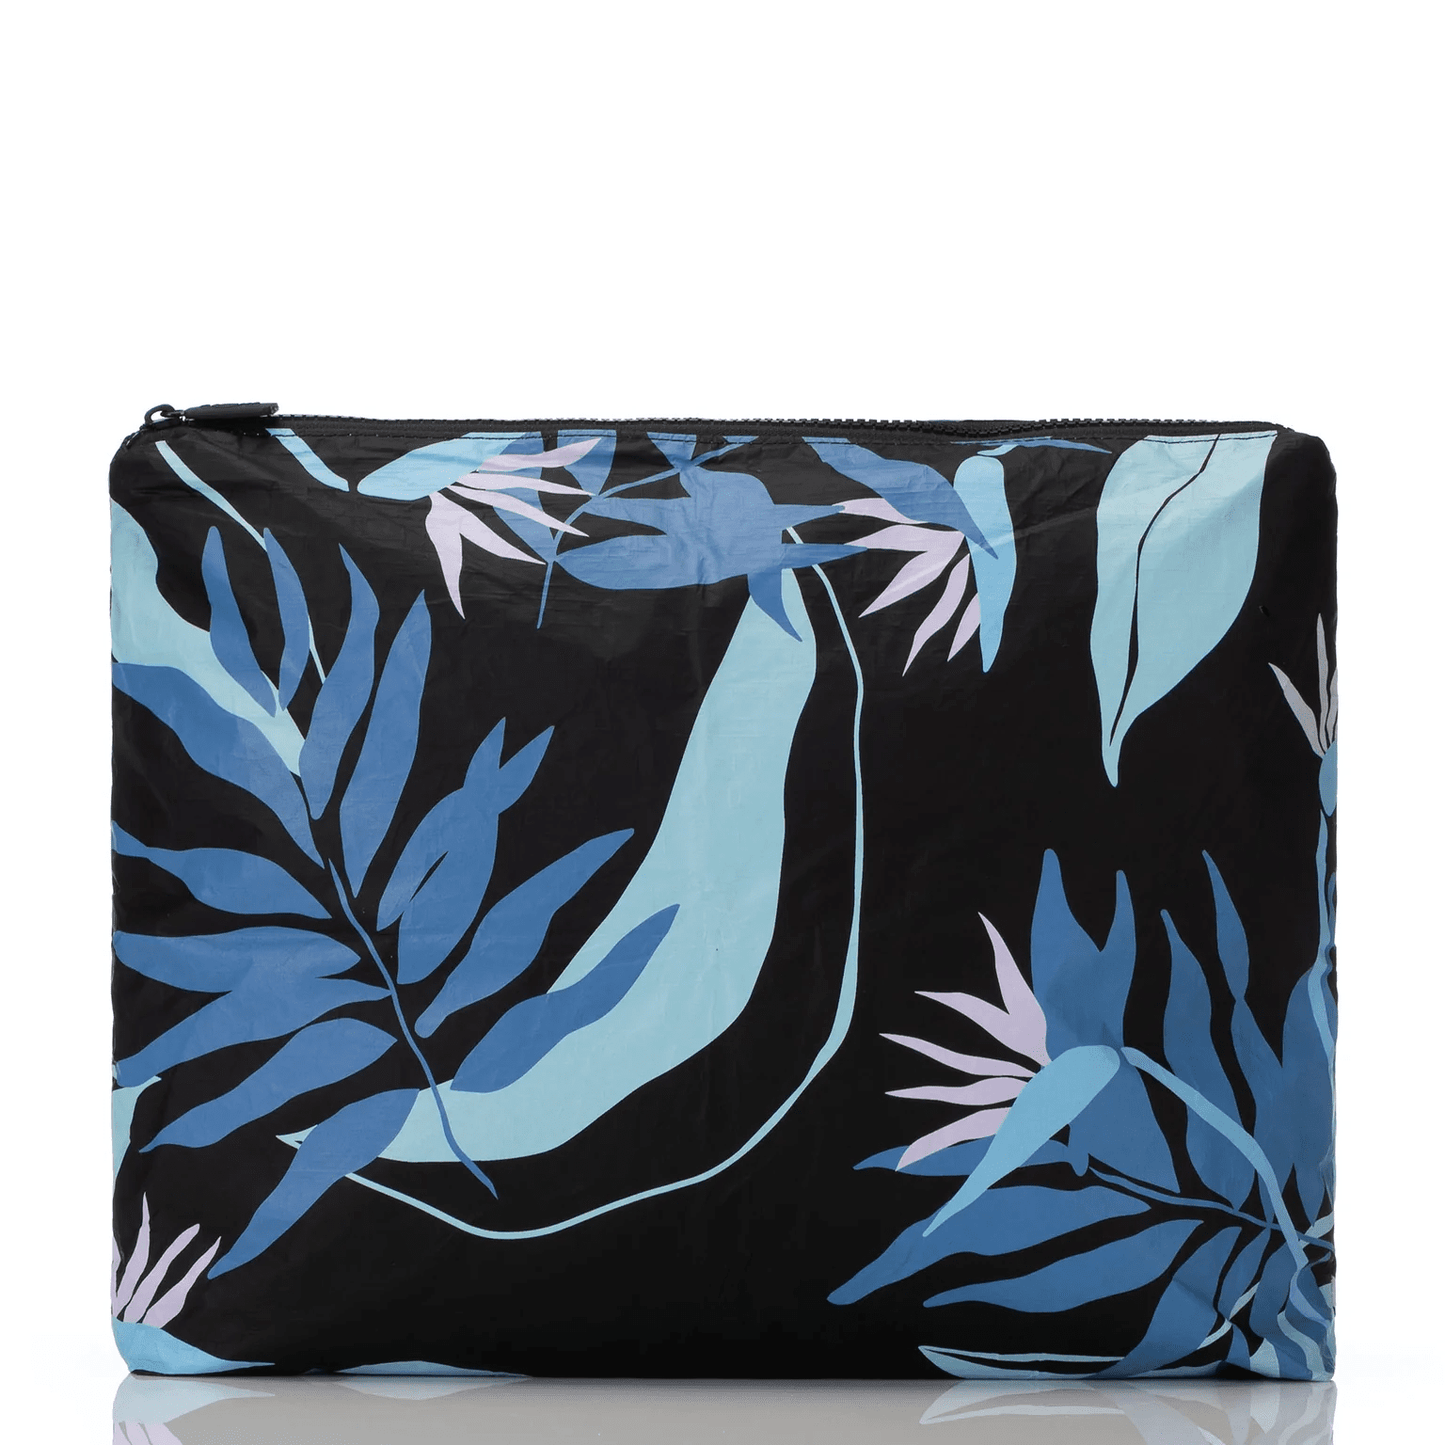 Painted Birds Huckleberry Max Pouch